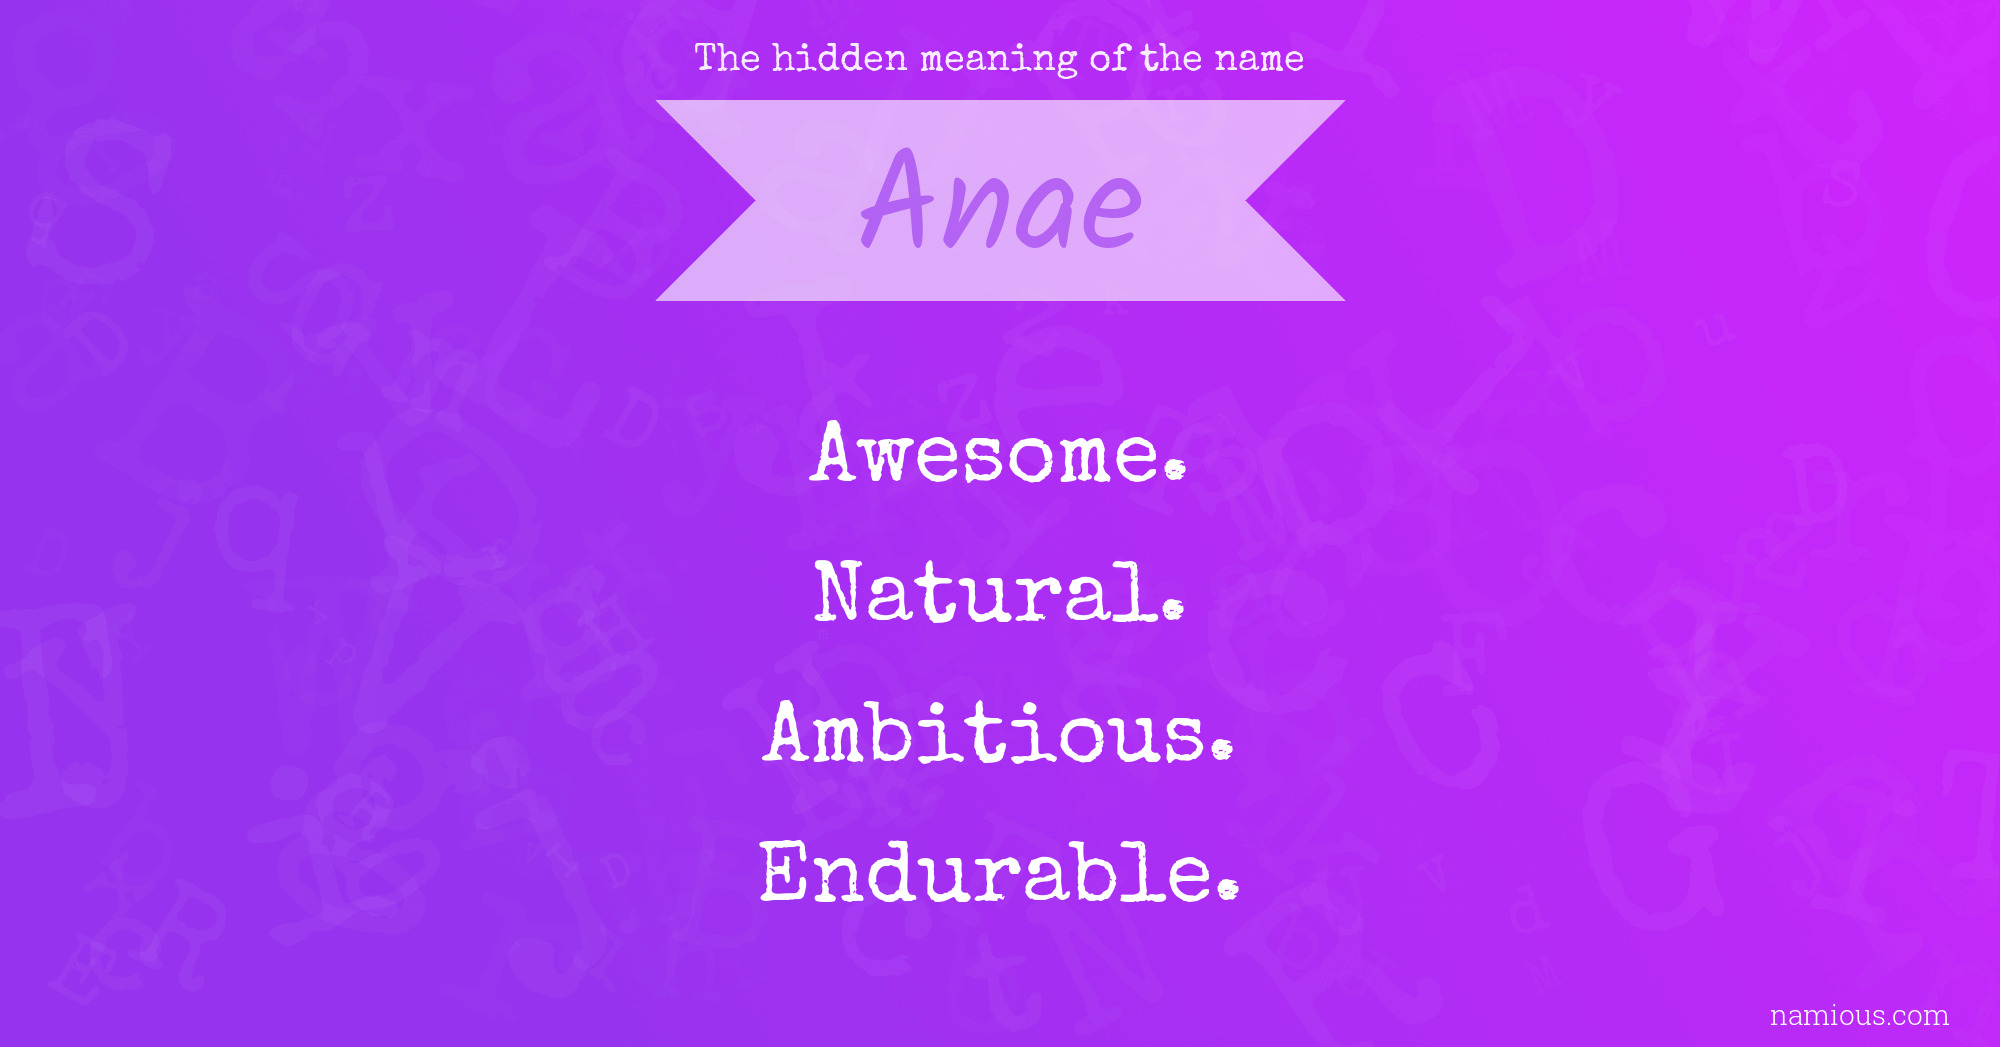 The hidden meaning of the name Anae